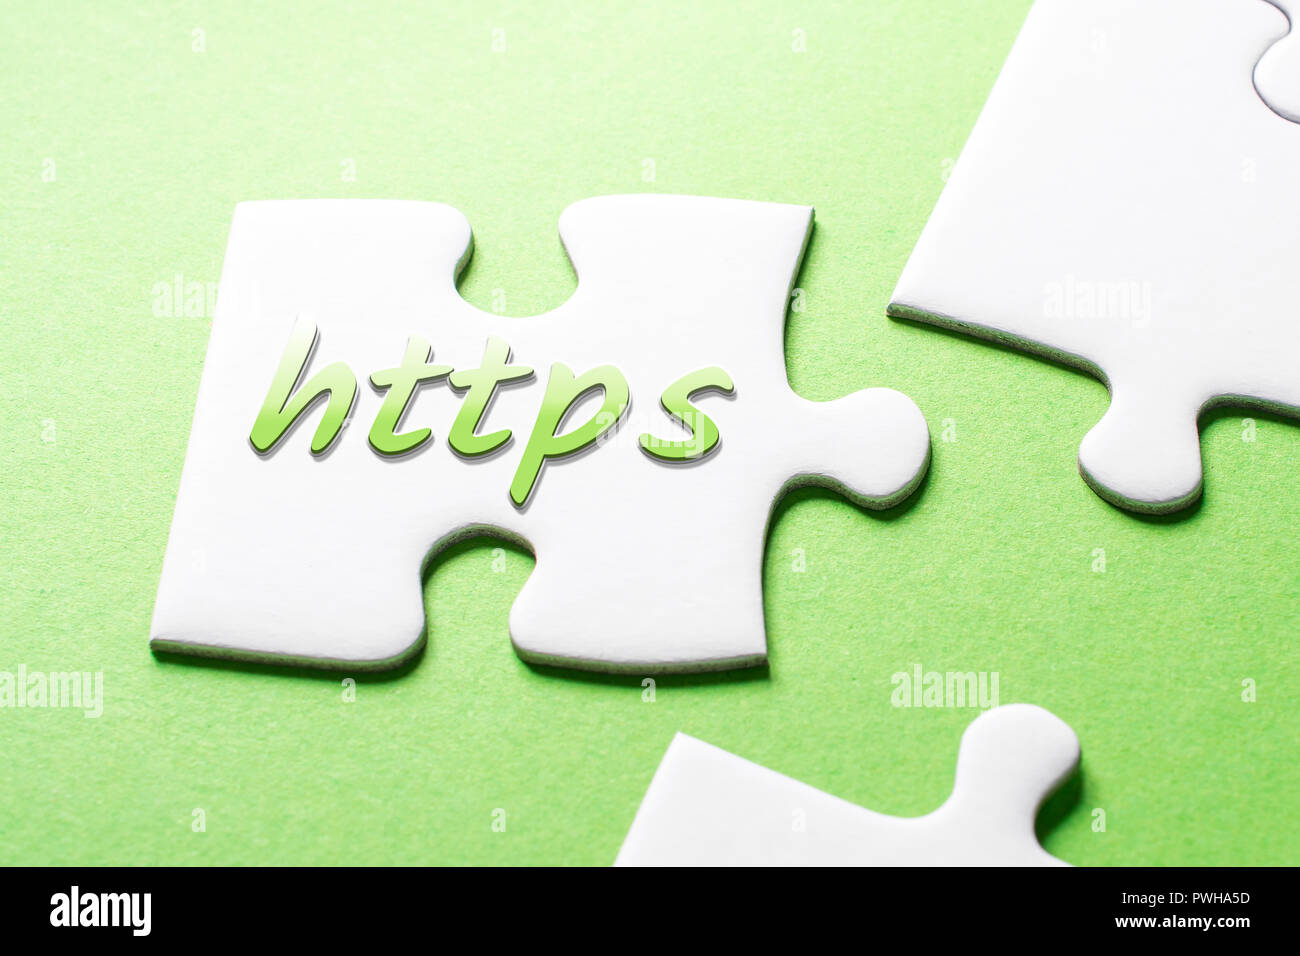 The Word HTTPS In Missing Piece Jigsaw Puzzle Stock Photo